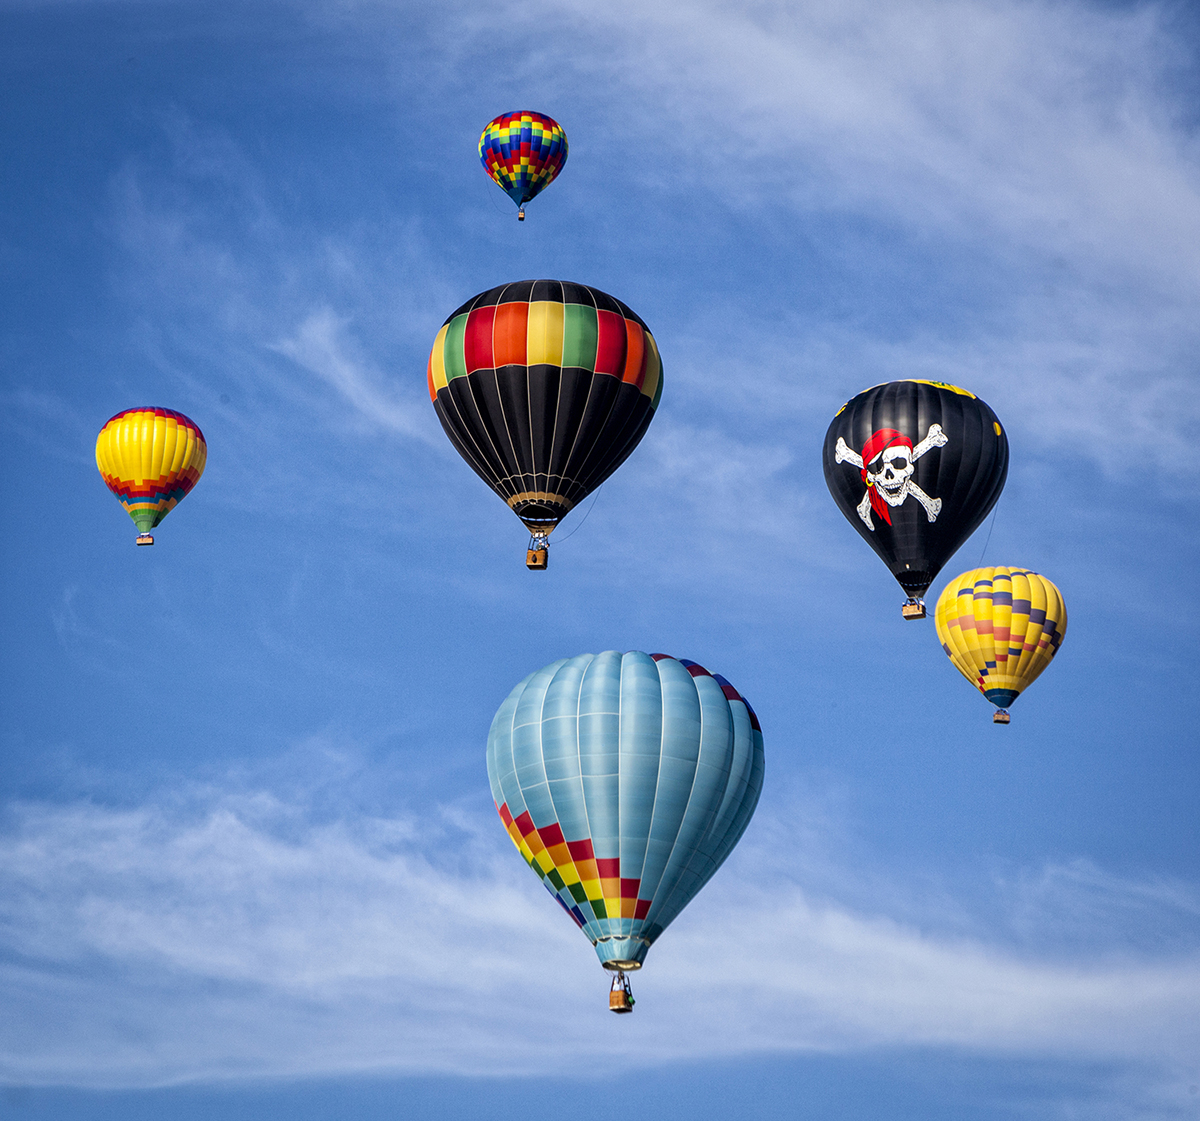 Colorful Hot Air Balloons Dot the Sky at the Temecula Valley Balloon & Wine Festival